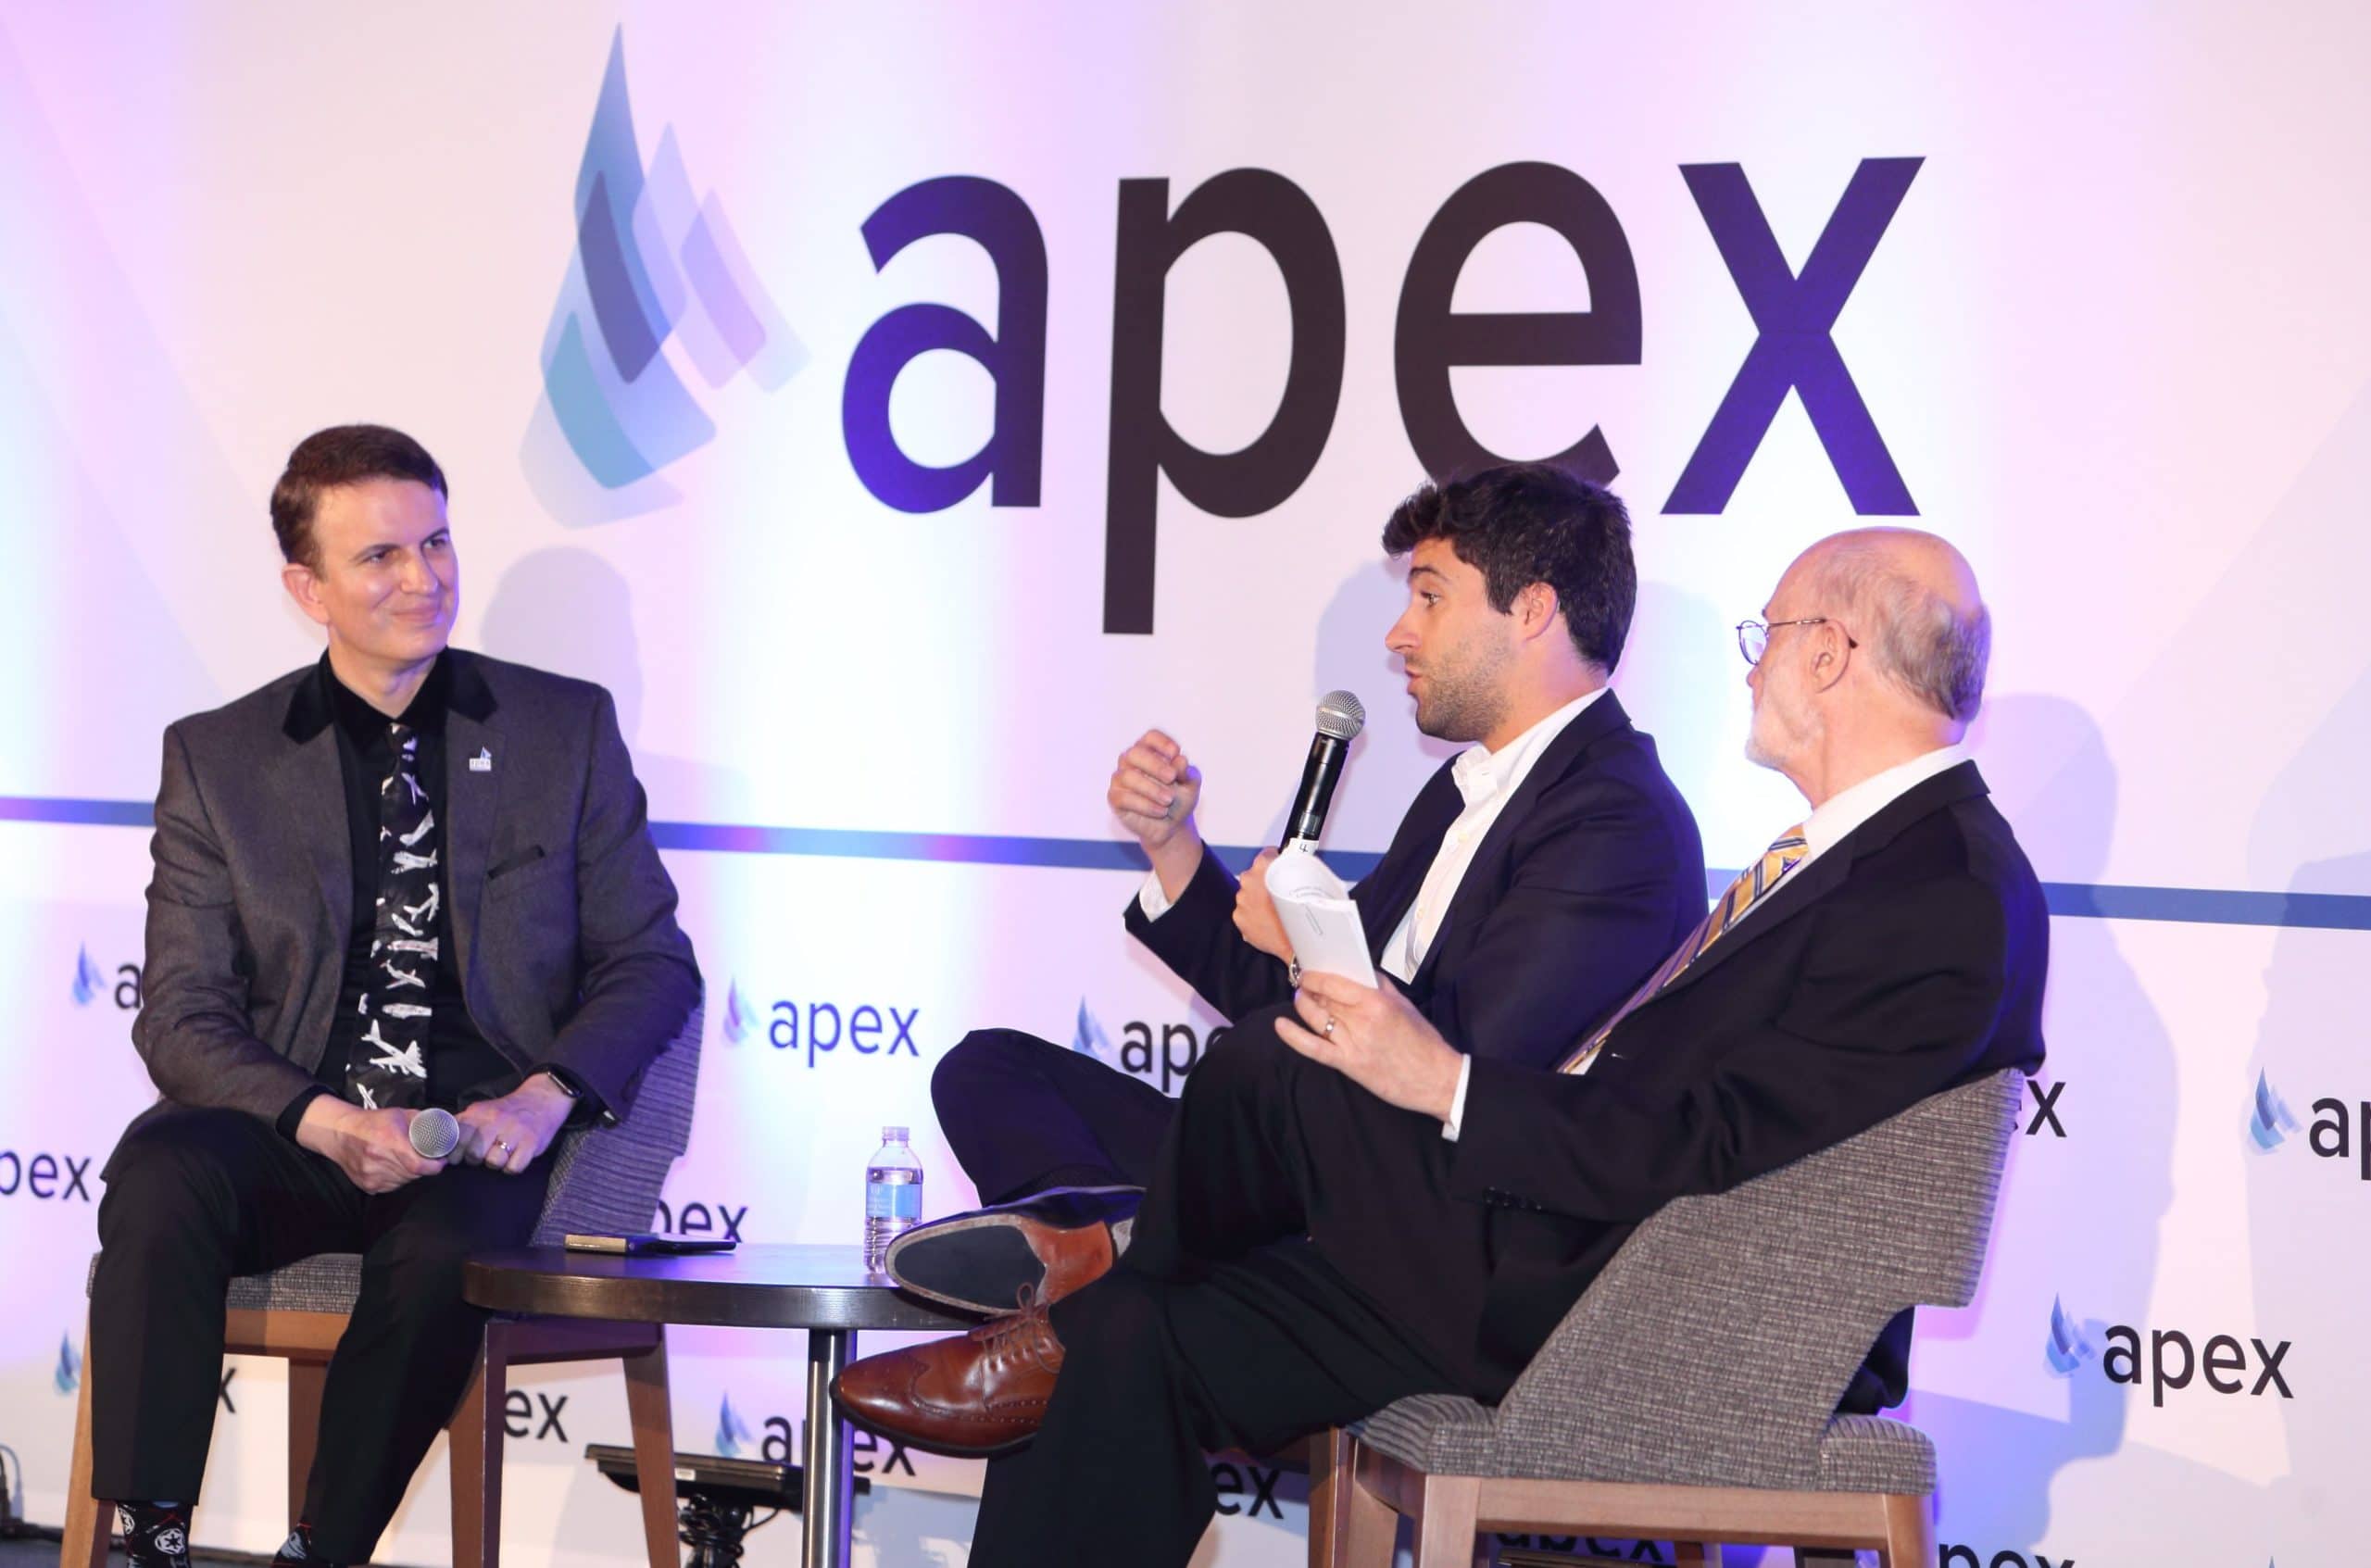 From left to right: Joe Leader, CEO, APEX; André Valera, director of Business Development, Touch Inflight; and Michael Childers, APEX Technology Committee Chair and APEX board member